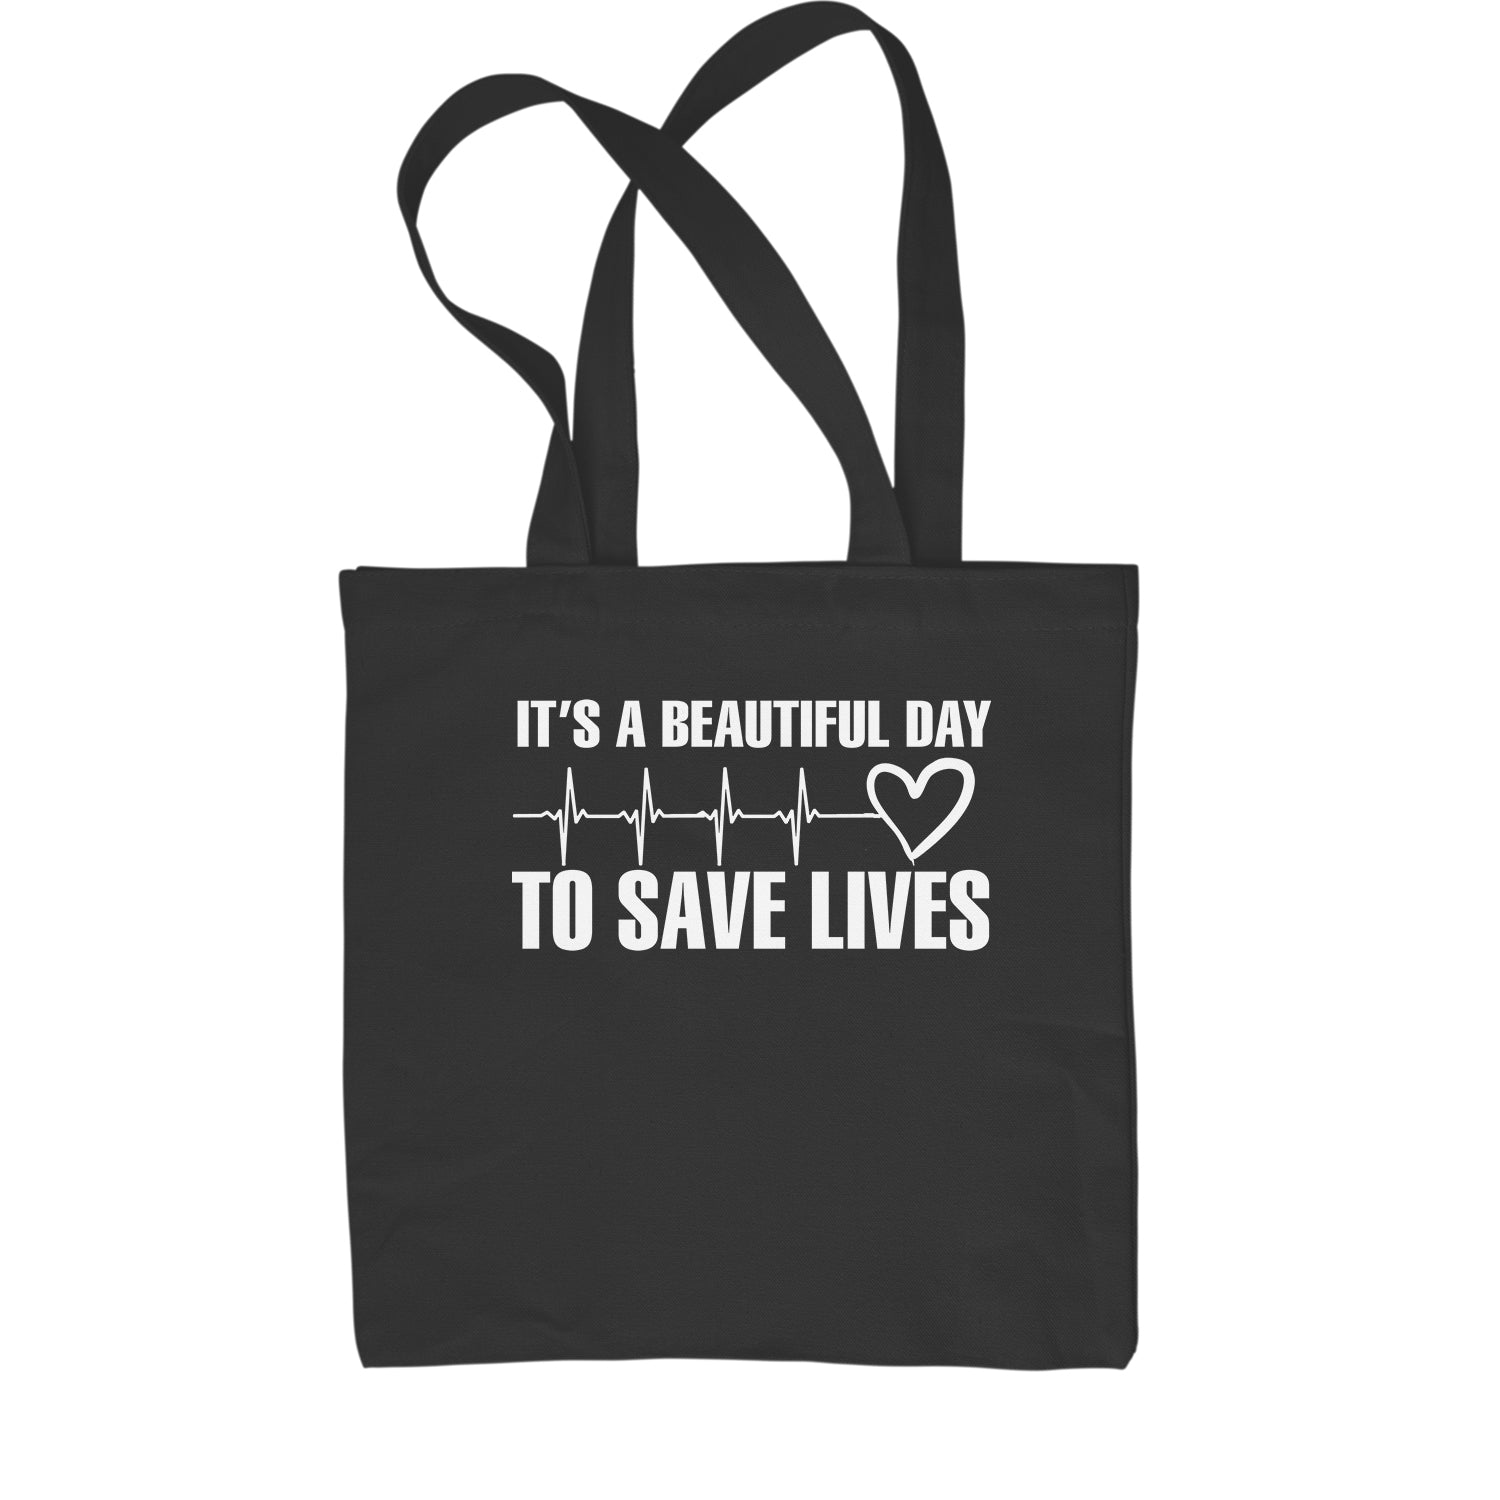 It's A Beautiful Day To Save Lives (White Print) Shopping Tote Bag #expressiontees by Expression Tees